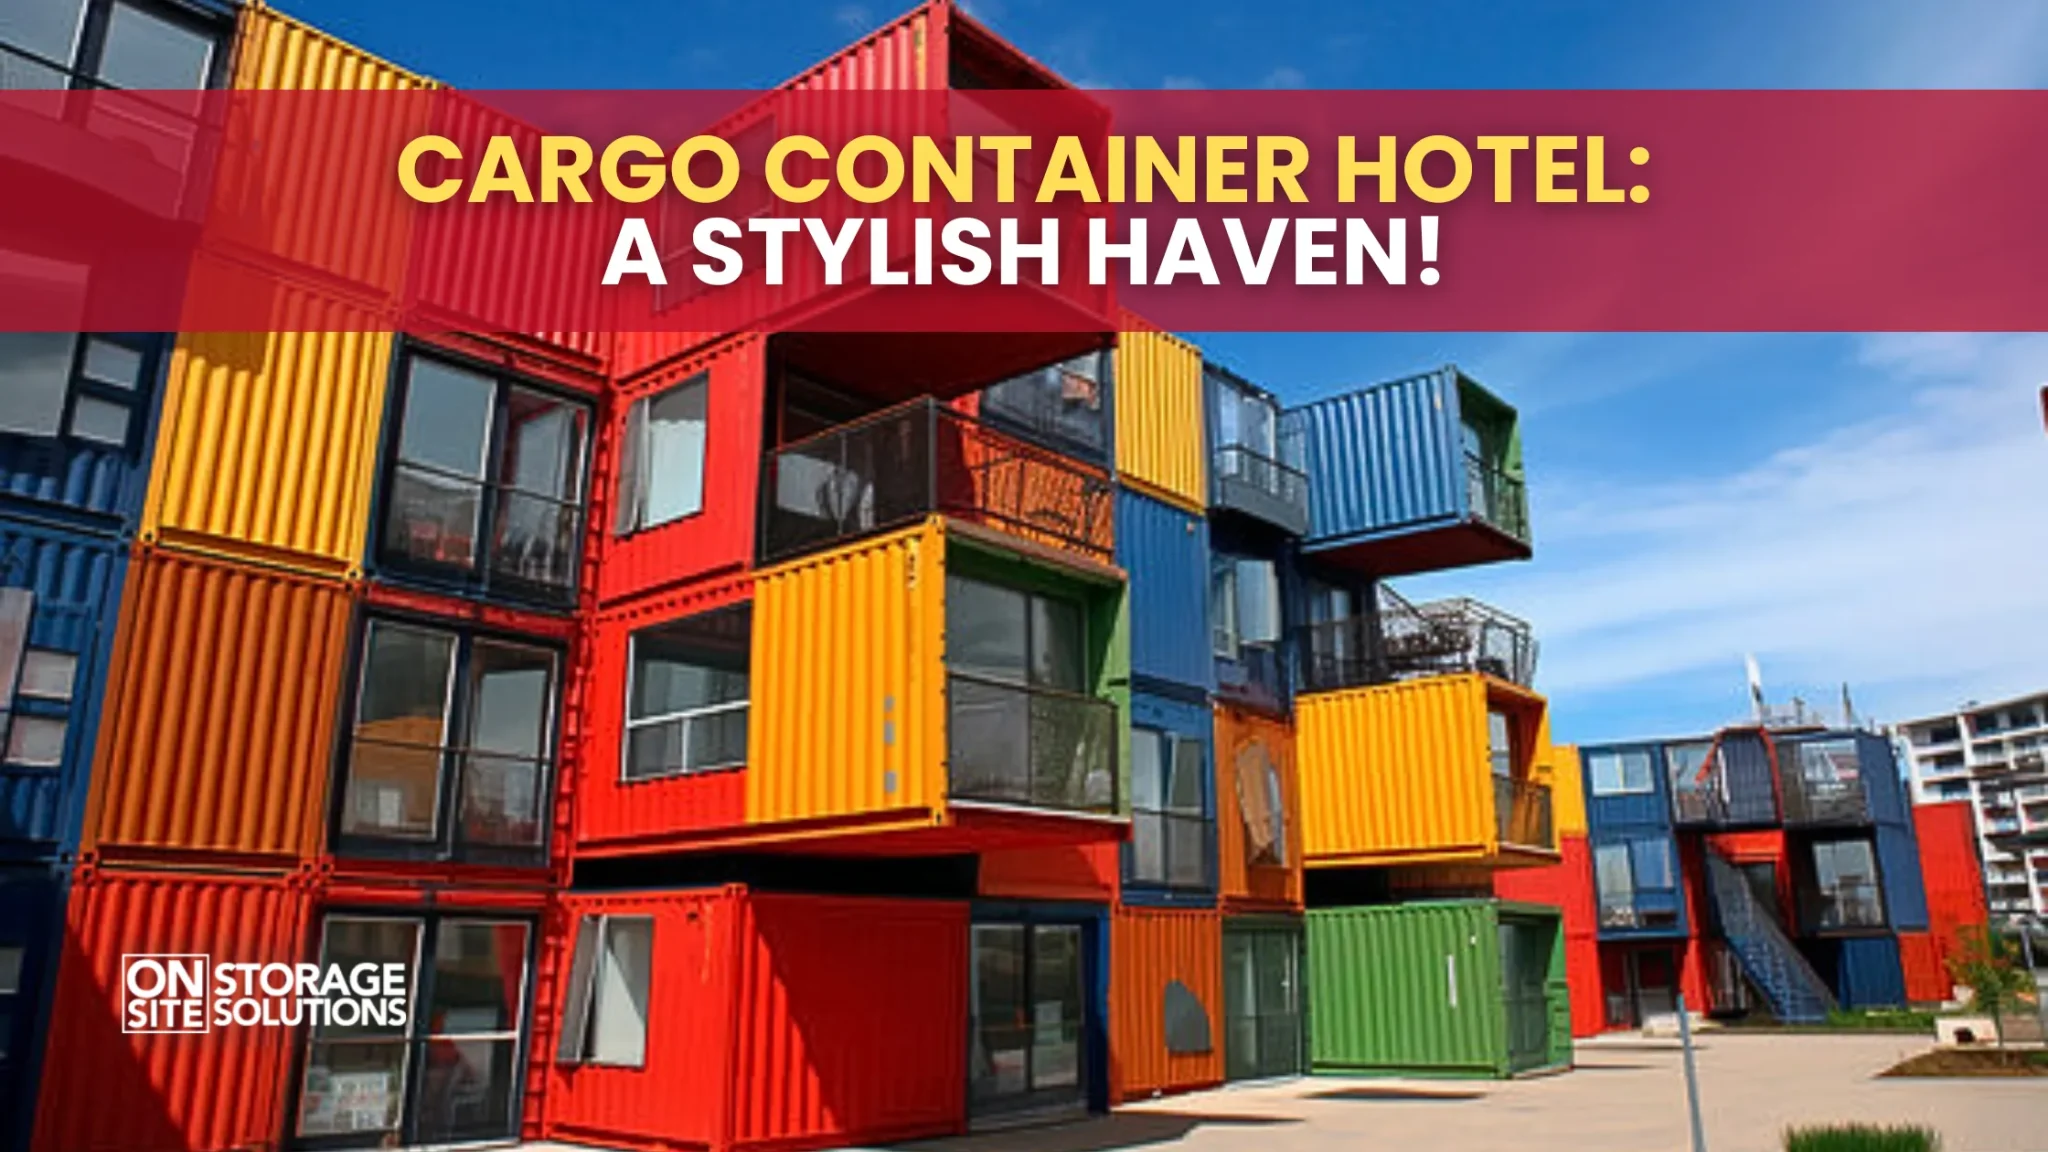 Cargo Container Hotel: A Stylish Haven!